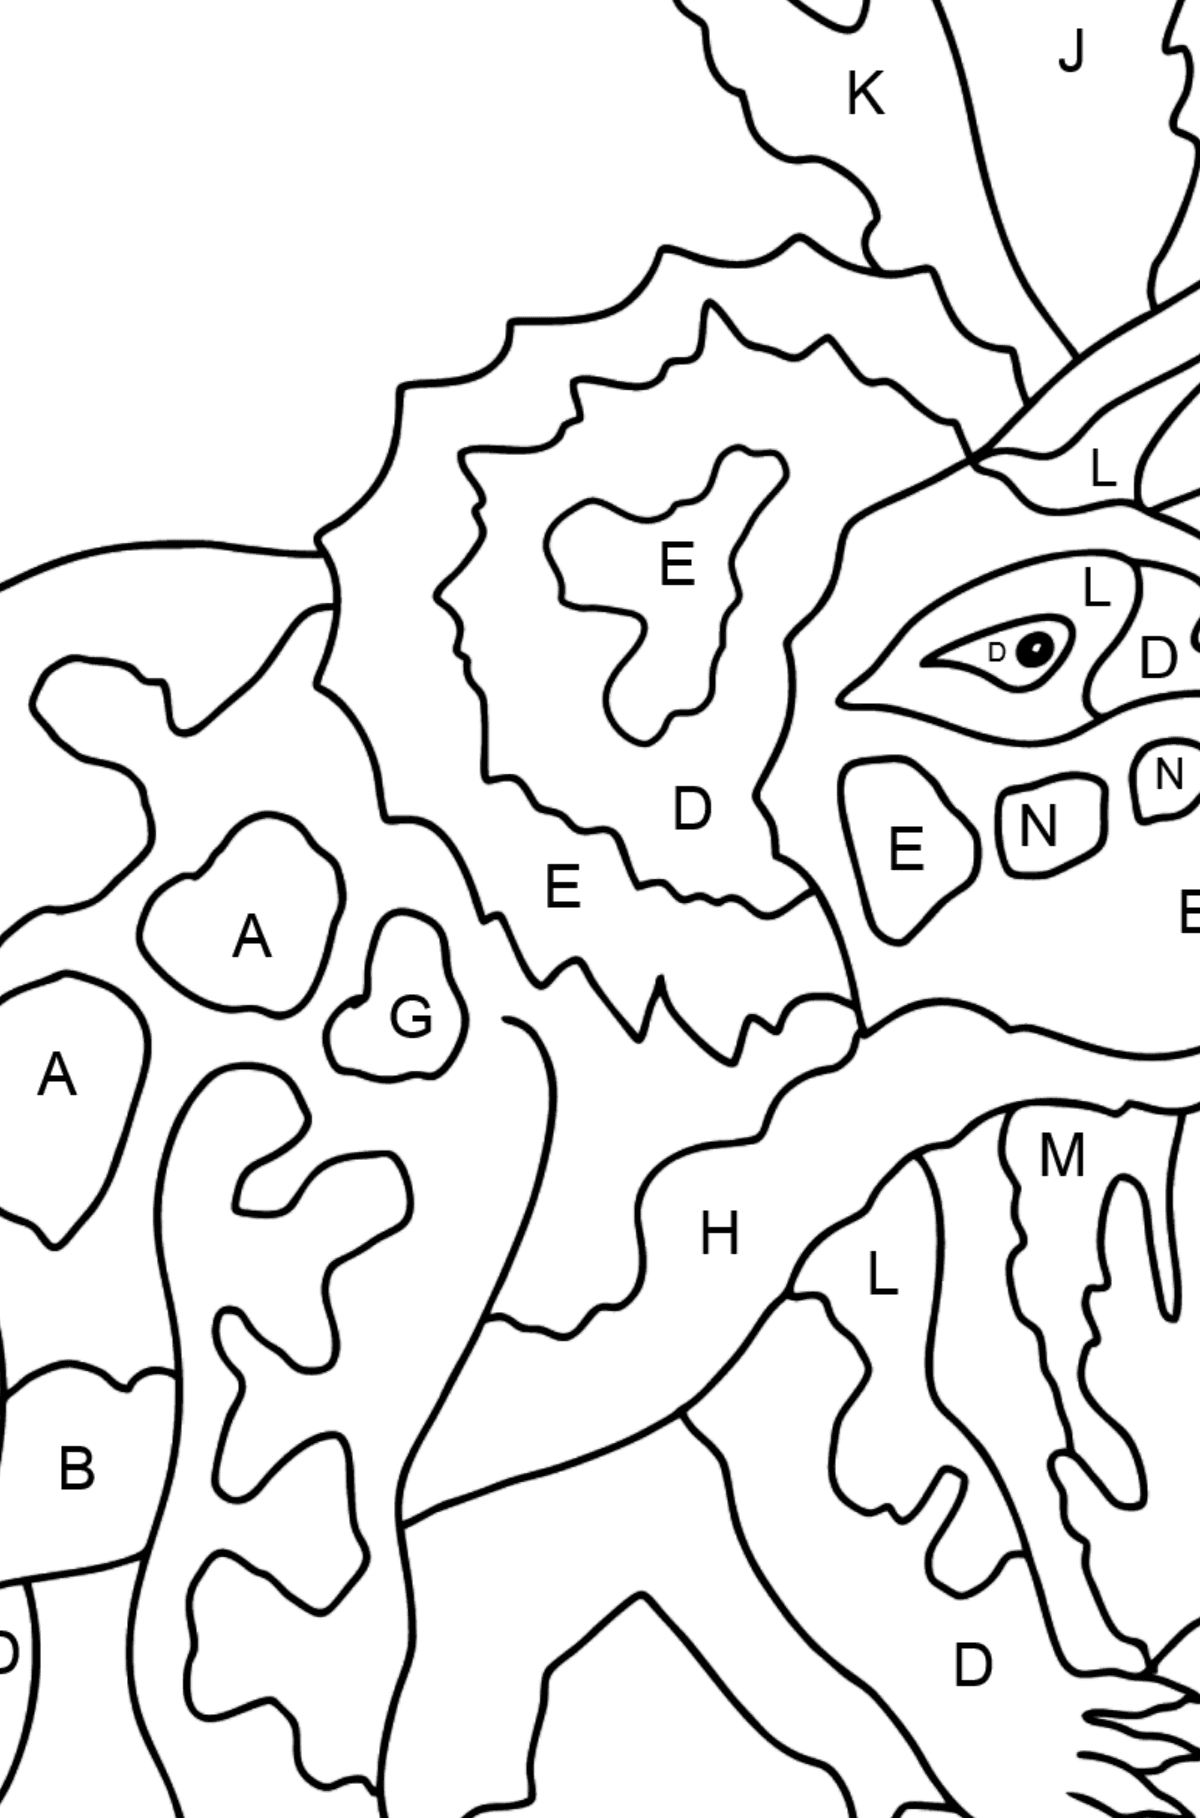 Coloring Page - Triceratops - A Grass-Eating Dinosaur - Coloring by Letters for Kids